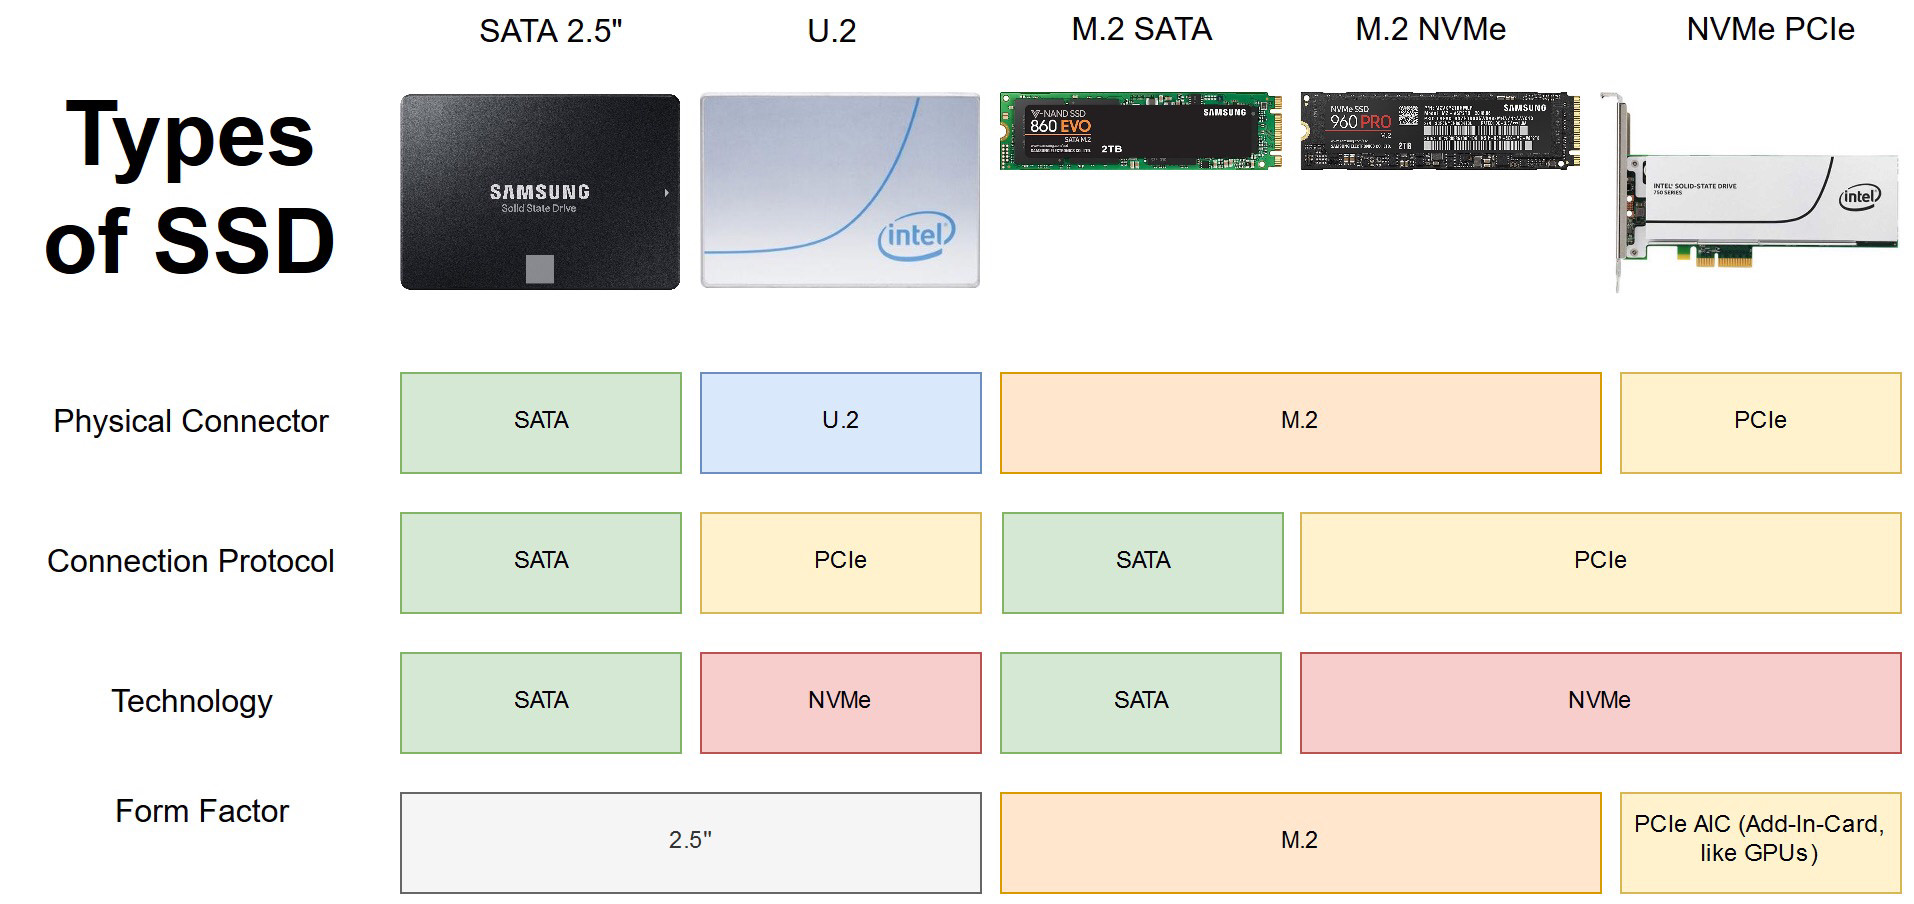 Different Types of SSDs Explained - 2.5" / M.2, SATA / PCIe, NVMe